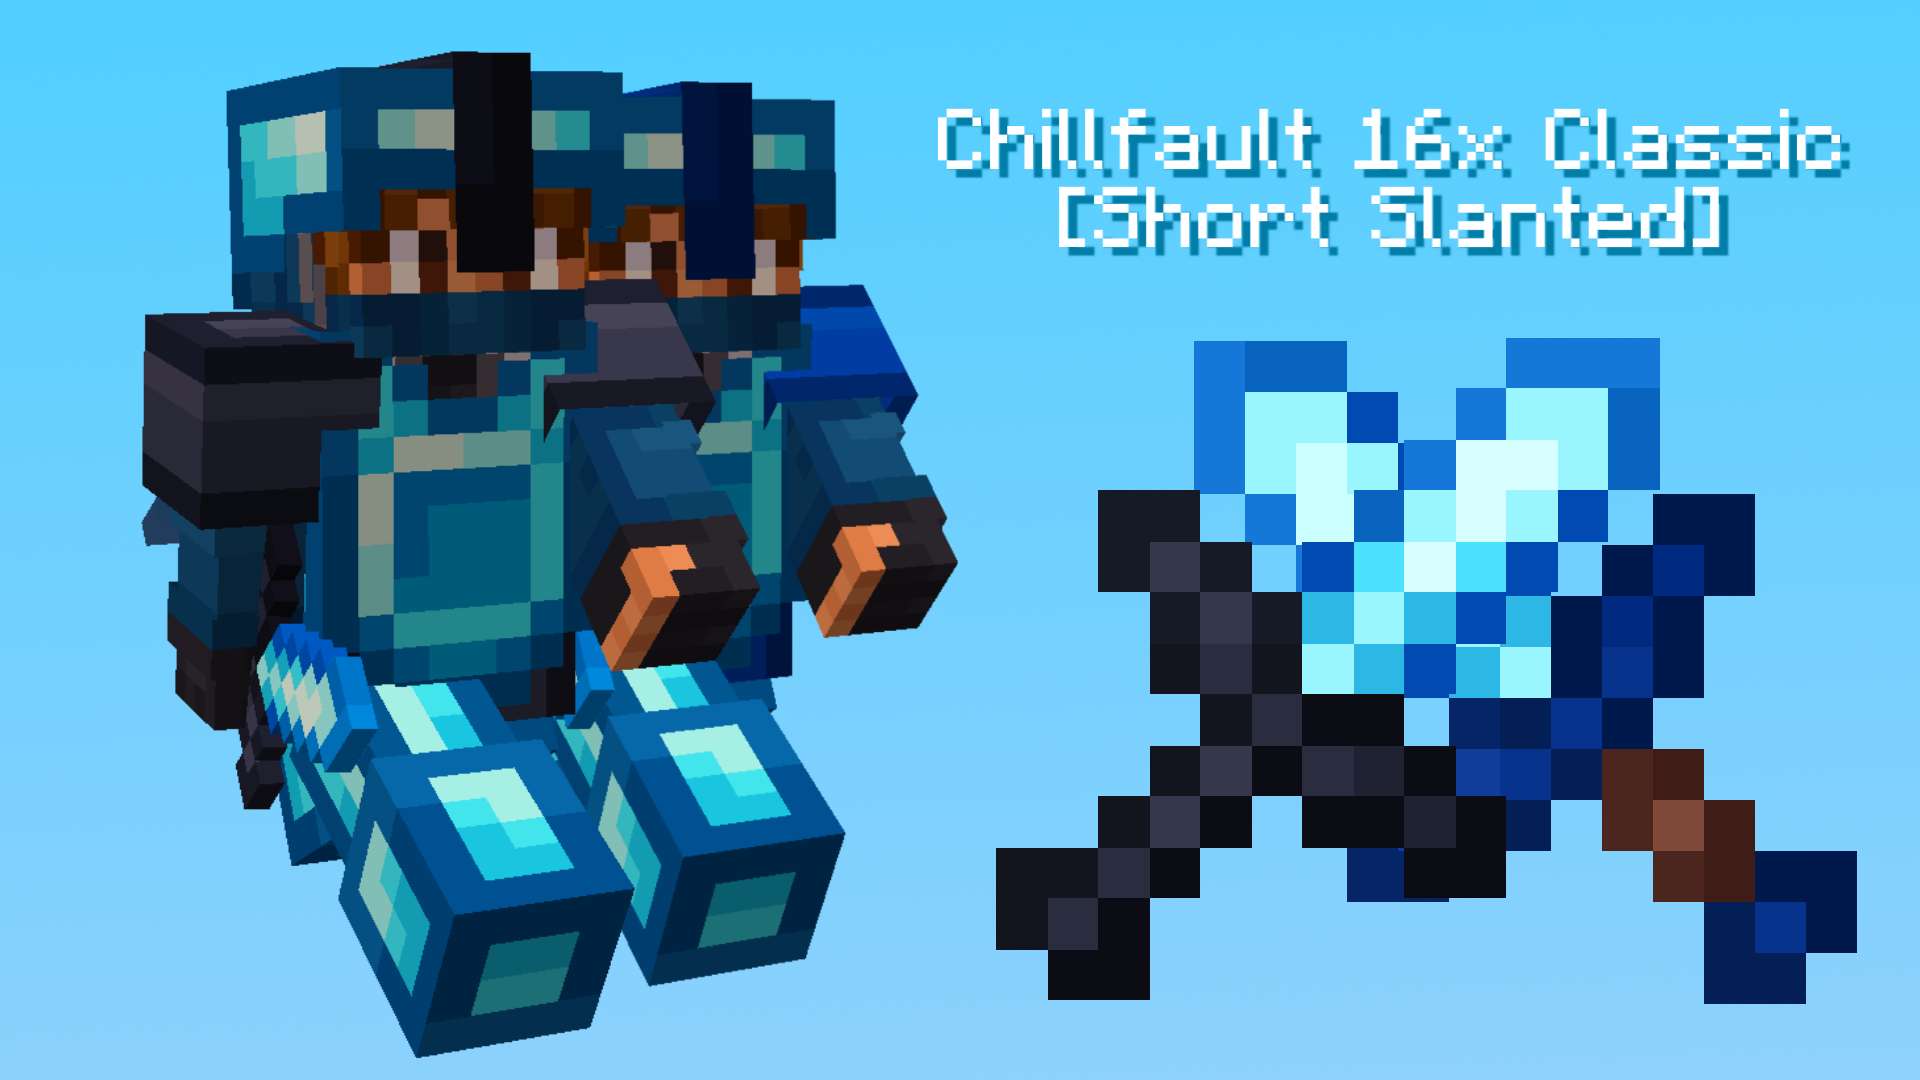 Gallery Banner for Chillfault  Classic [Short Slanted] on PvPRP